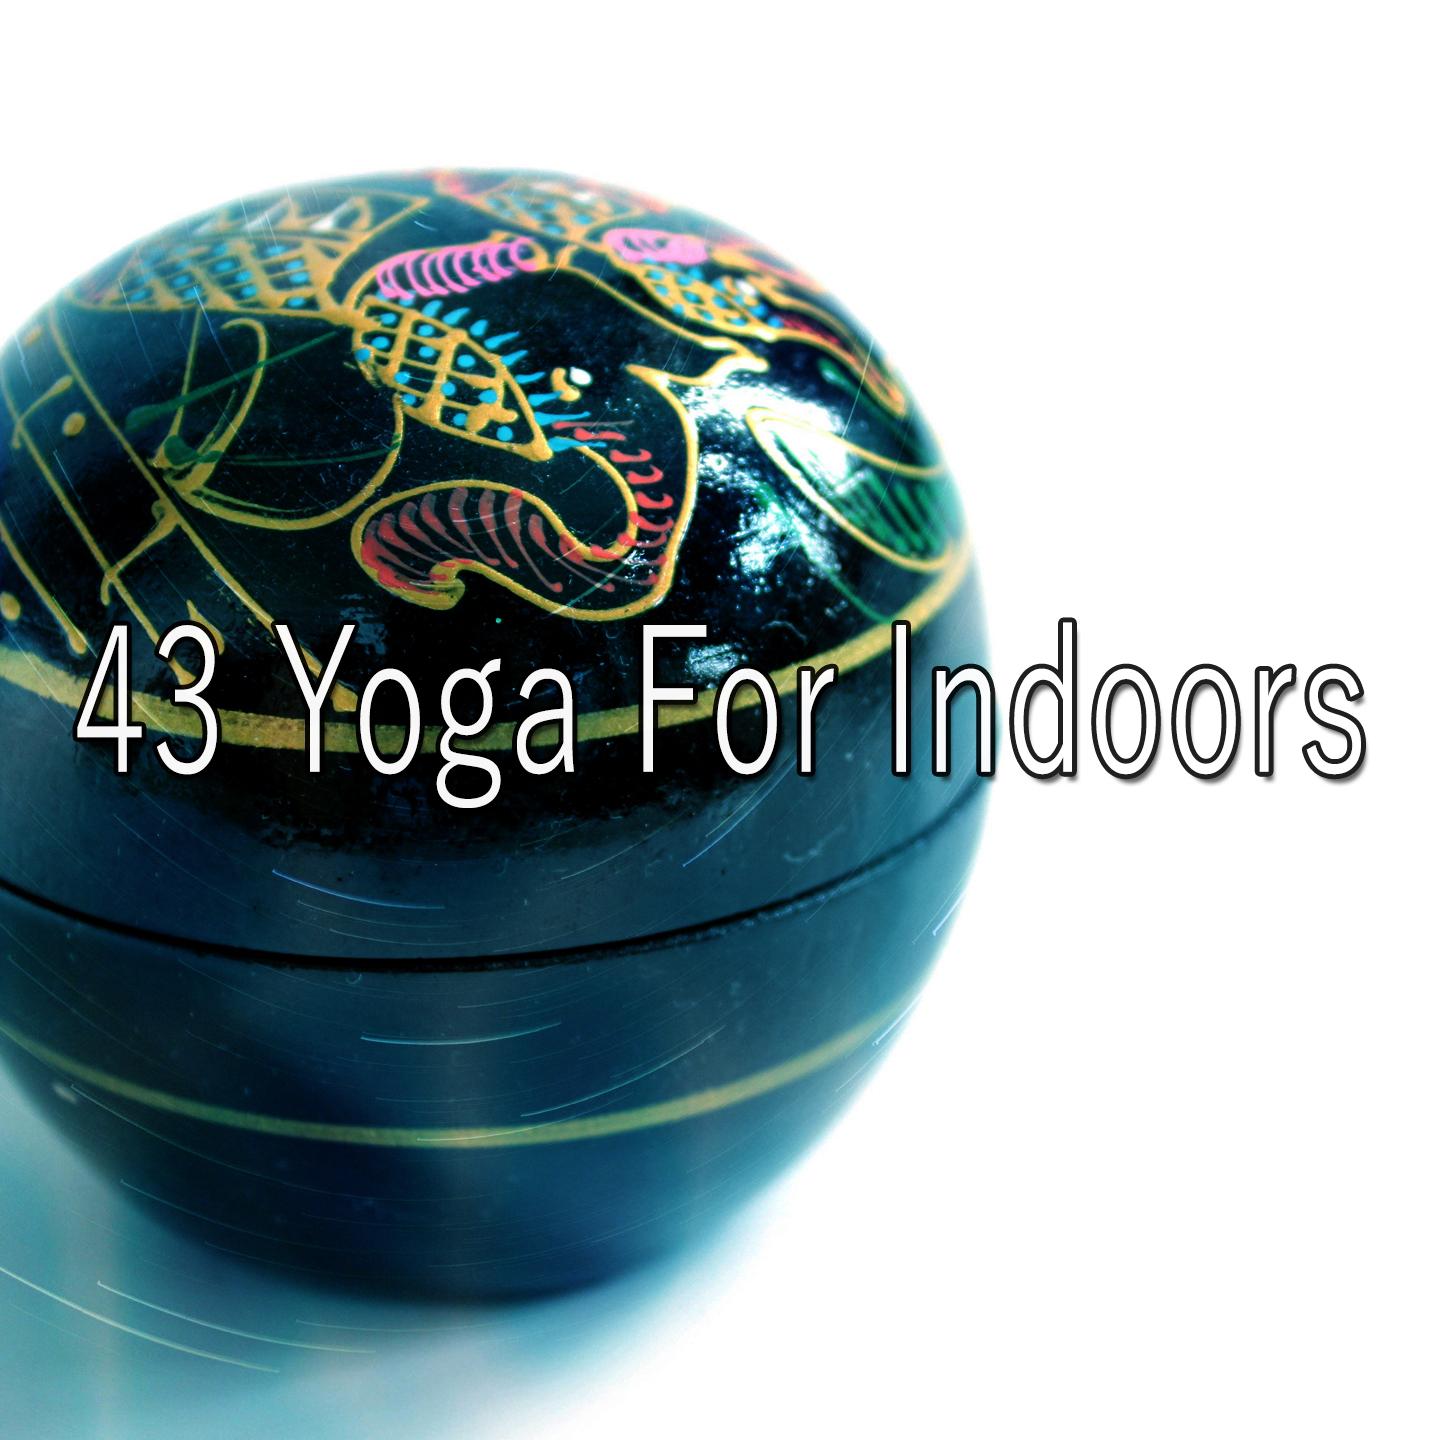 43 Yoga for Indoors